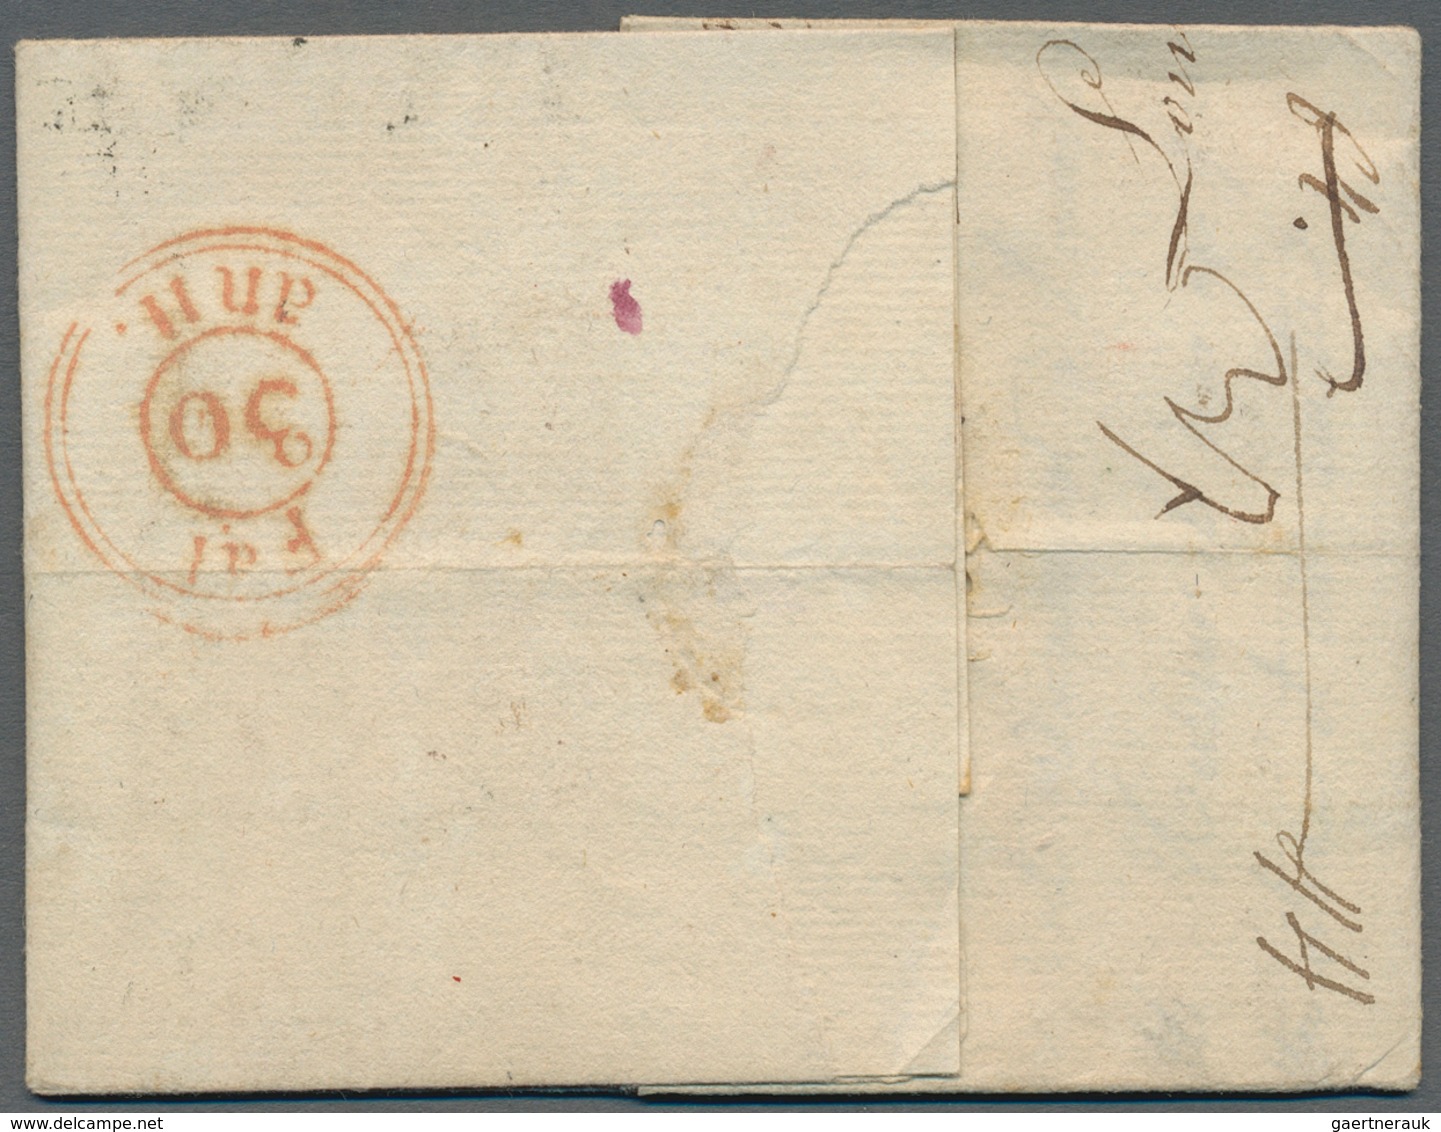 Russland - Vorphilatelie: 1803 Cover From Moscow With Single Line Cancel "Par Wesel" Applied In Colo - ...-1857 Vorphilatelie